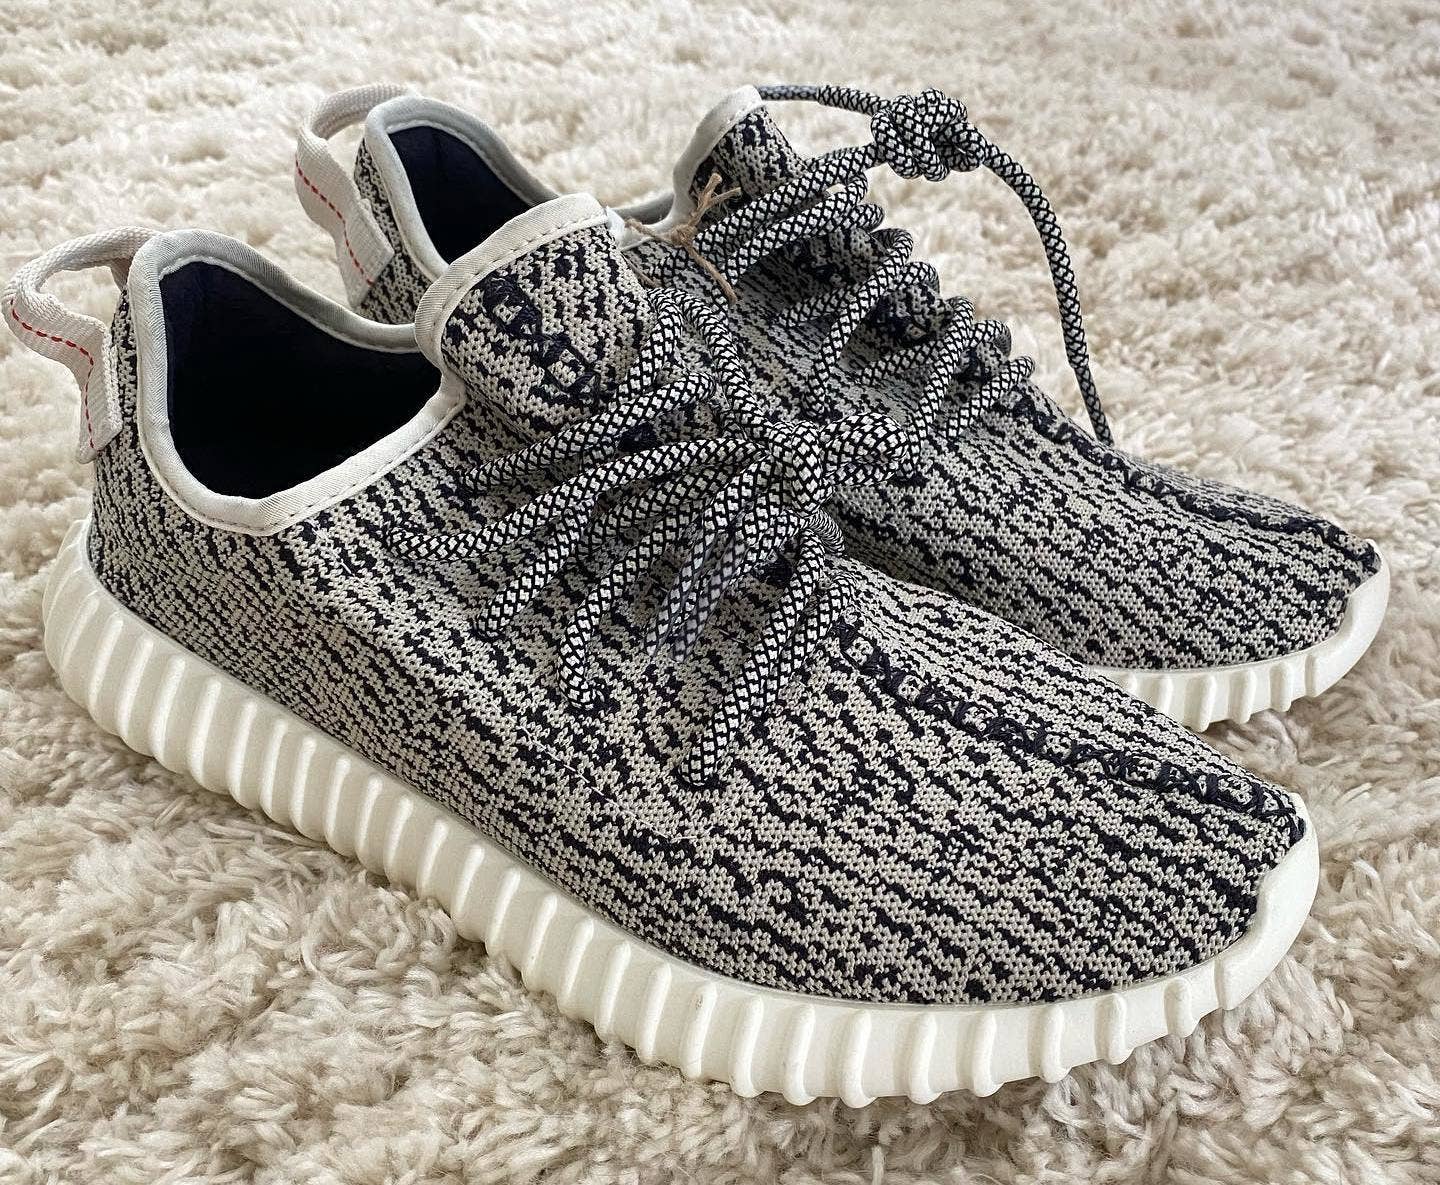 Detailed Look This 'Turtle Dove' Adidas Yeezy Boost 350 | Complex